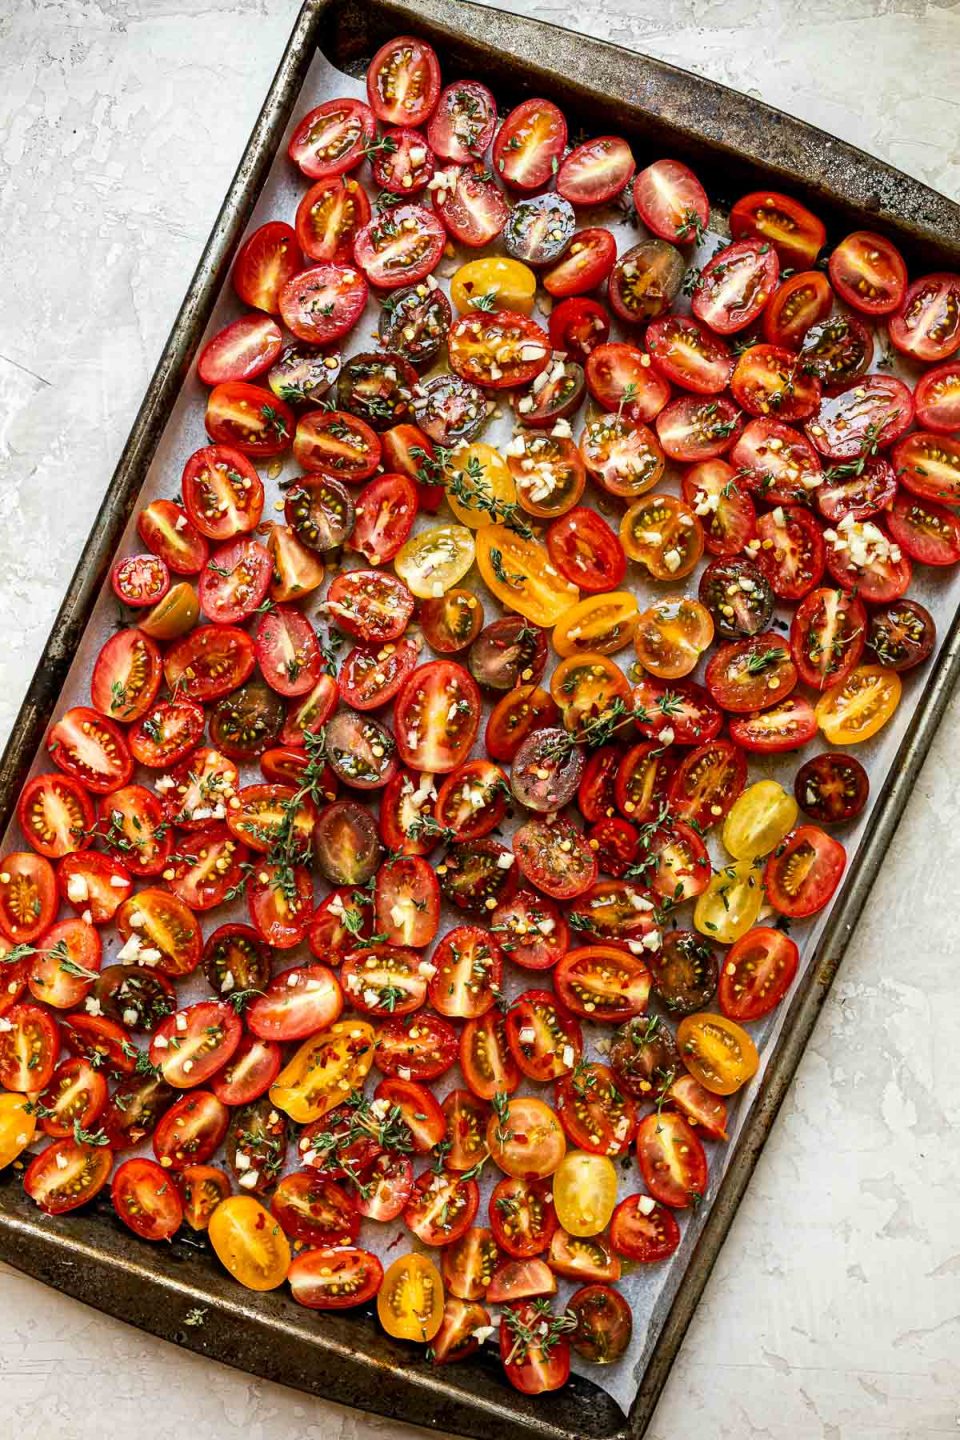 Raw cherry tomatoes arranged on a sheet pan lined with white parchment paper - sprinkled with fresh herbs & garlic ready to be slow roasted. The sheet pan rests on top of a light gray colored textured surface.